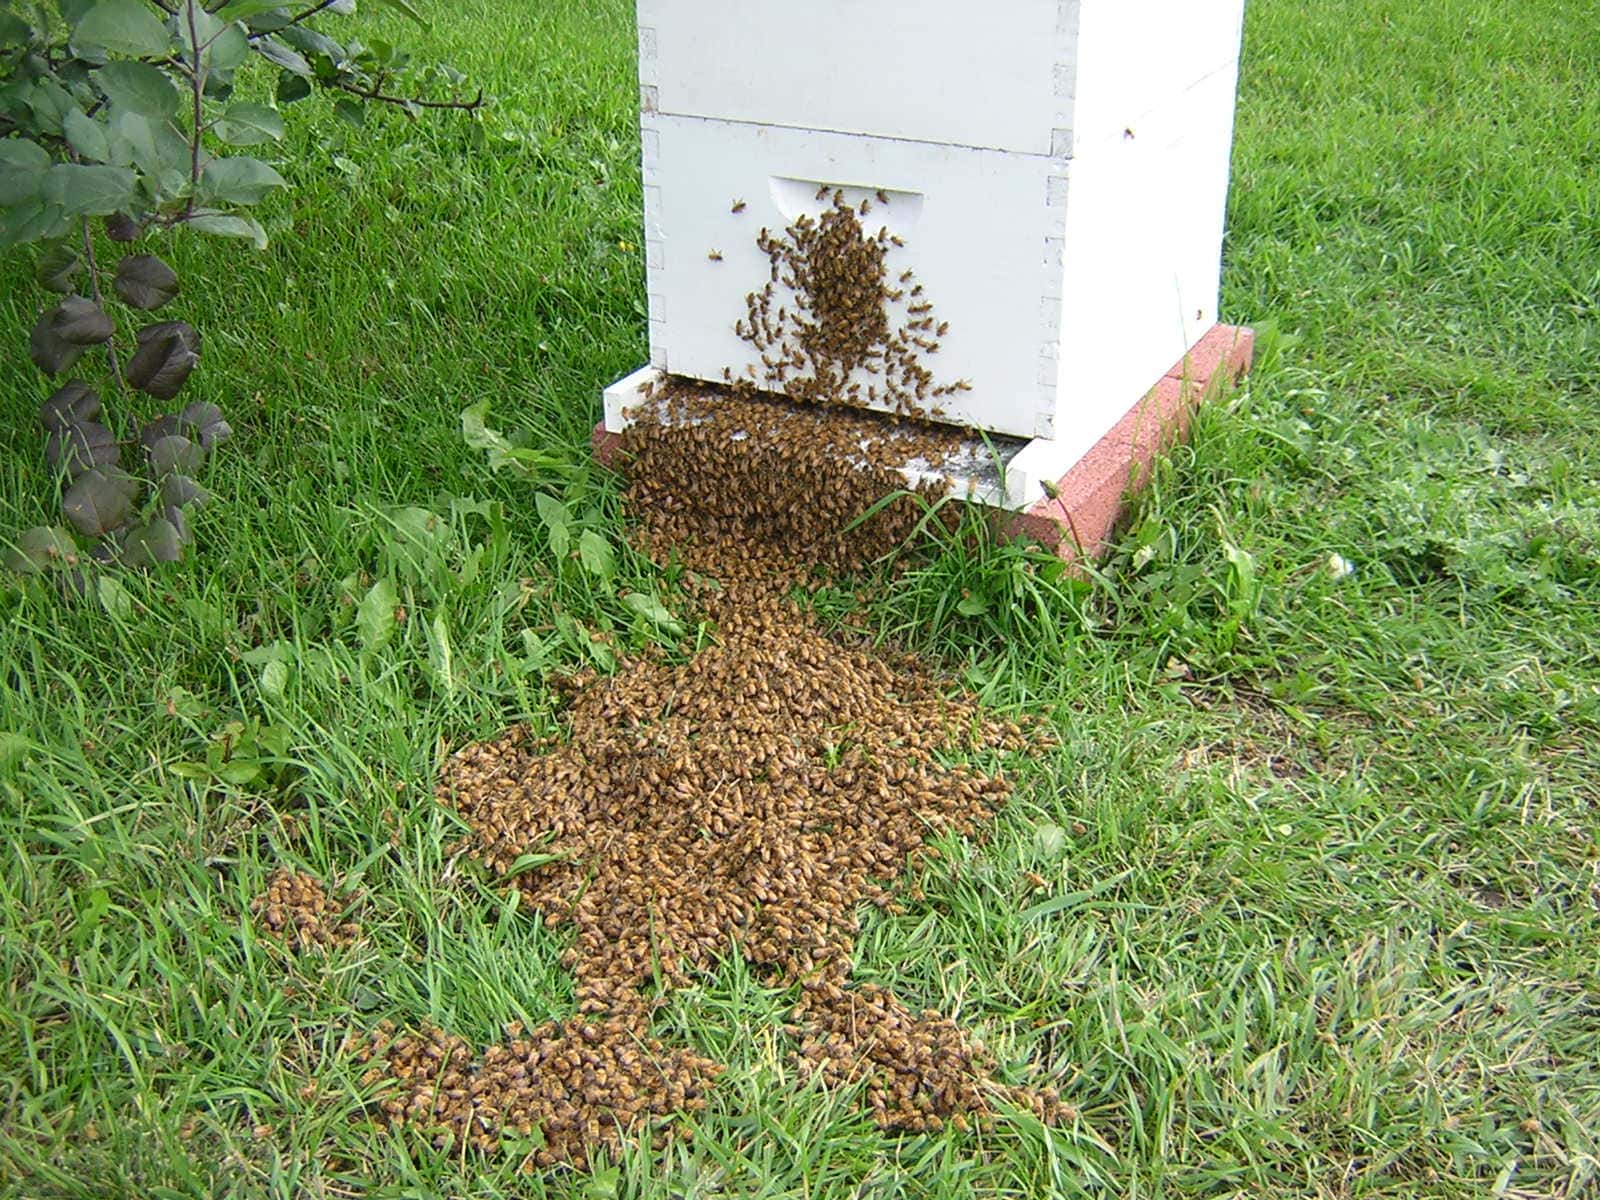 An indication of too many bees in a hive. Potential swarm. Grisak